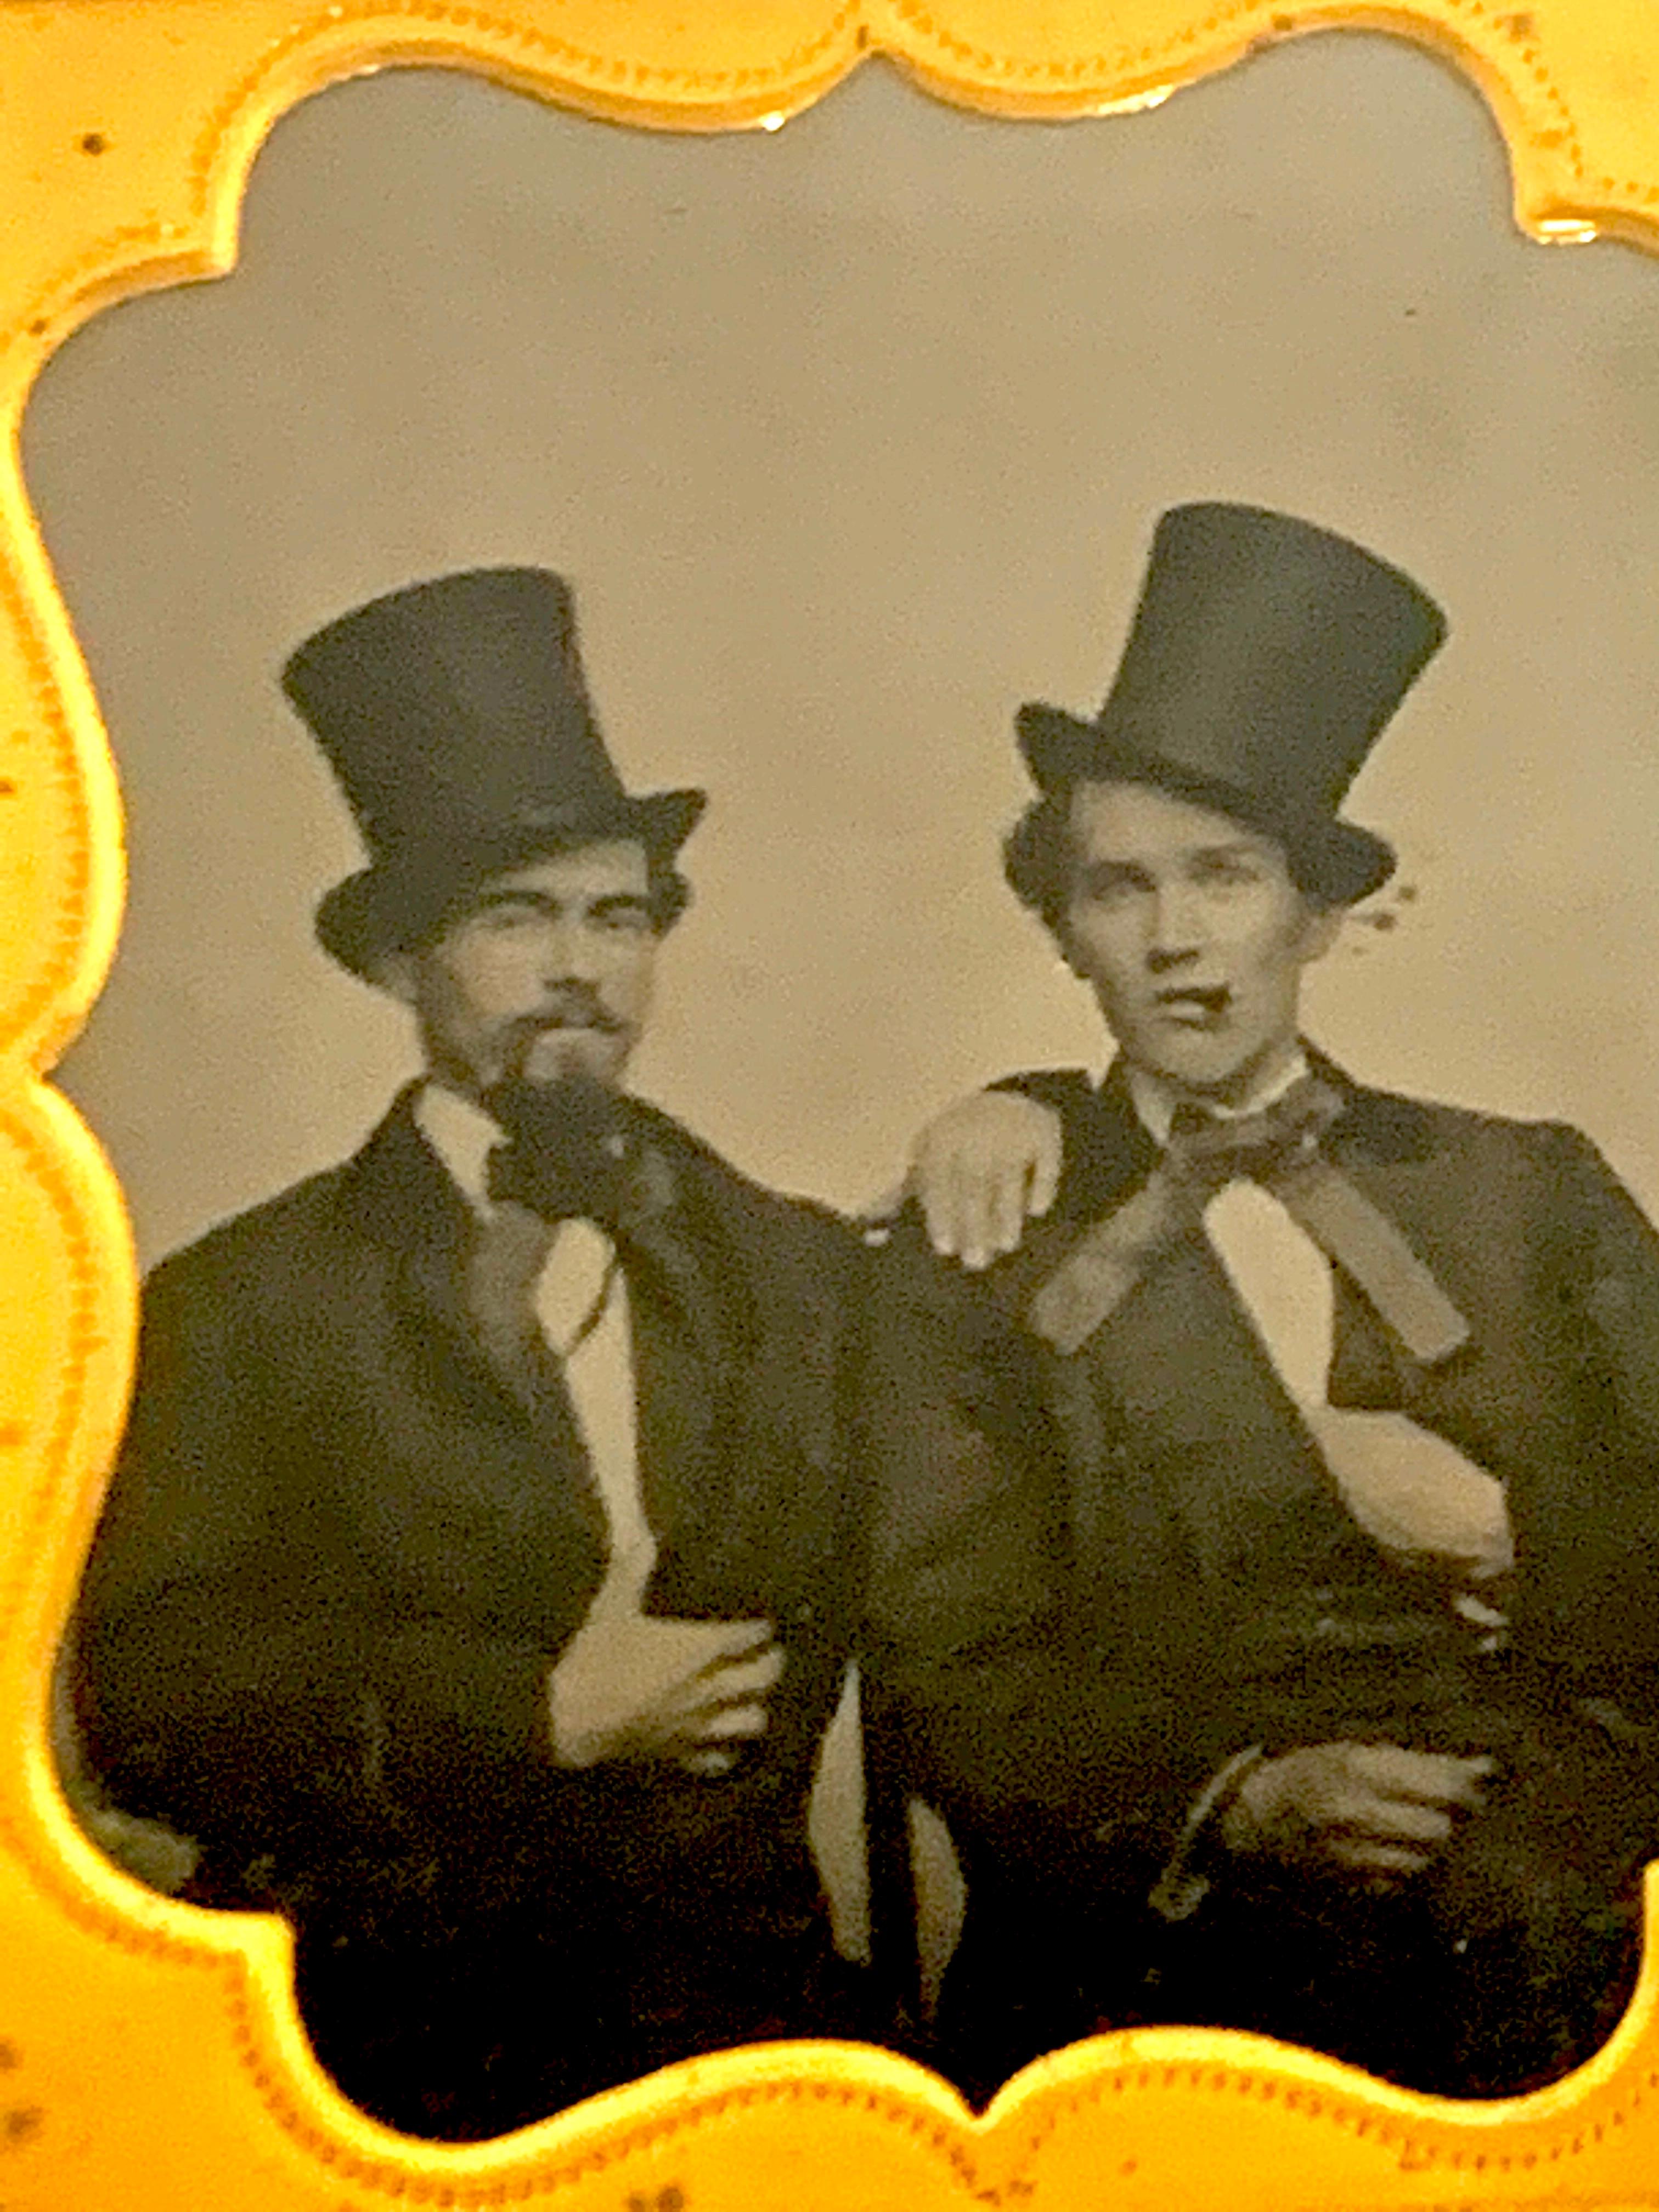 Daguerreotype Portrait of Two Men Embracing, Smoking with Ties and Top Hats For Sale 1